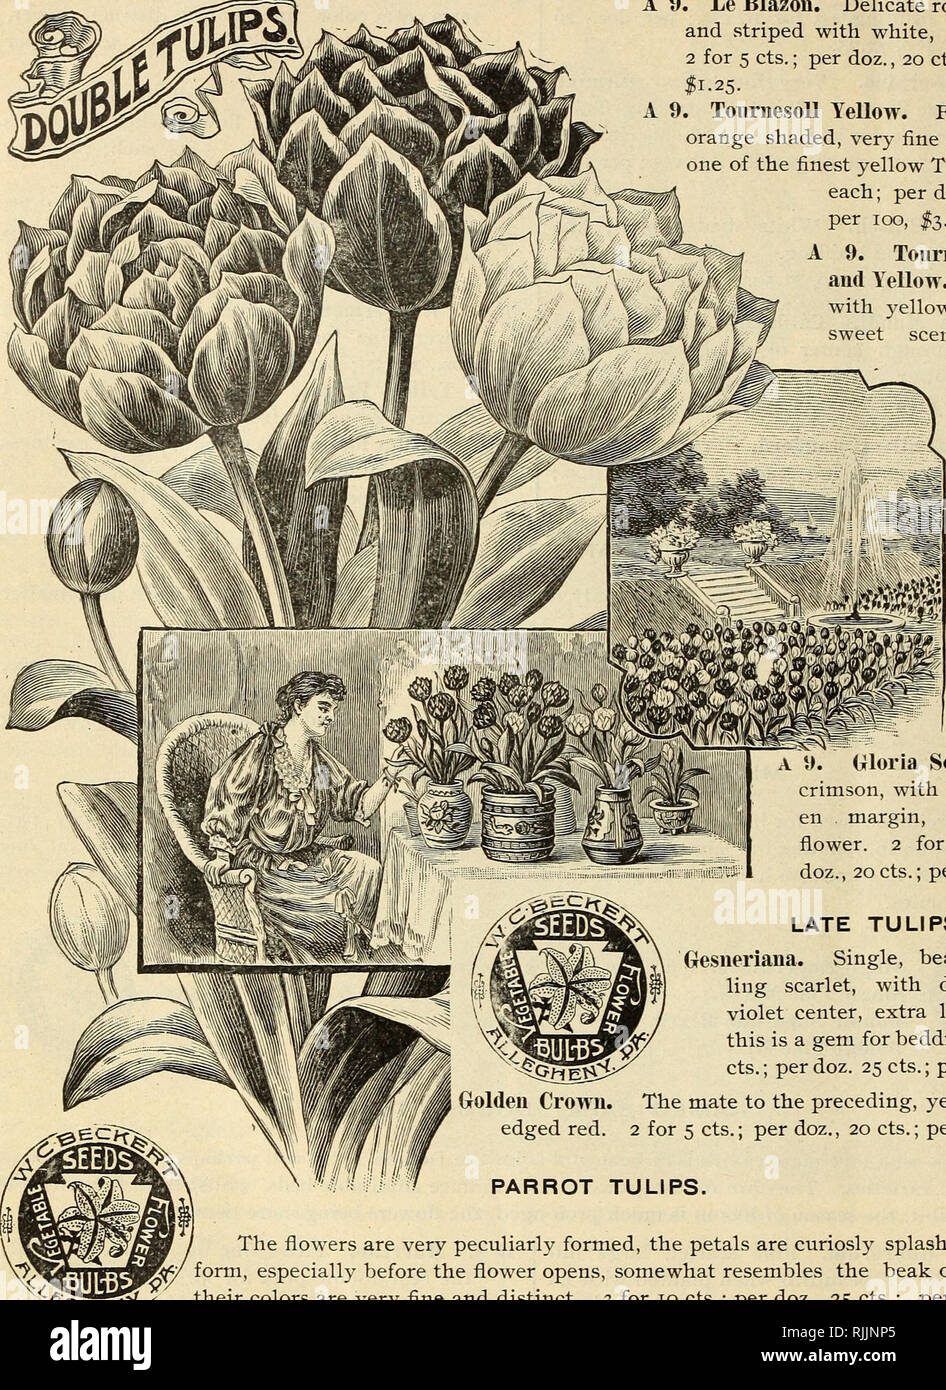 . Beckert's bulbs. Commercial catalogs Seeds; Bulbs (Plants) Seeds Catalogs; Flowers Seeds Catalogs; Garden tools Catalogs. lO WM. C. BECKERT, ALLEGHENY, PA, NAMED EARLY DOUBLE TULIPS.-CONTINUED. A 9 . Le Blazon. Delicate rose, shaded and striped with white, extra fine. 2 for 5 cts.; per doz., 20 cts.: per 100, I1.25. ToiiriiesoU Yellow. Fine yellow, orange shaded, very fine for forcing, one of the finest yellow Tulips. 5 cts each; per doz., 40 cts,; per 100, 13.00. A 9. Tournesoll Red and Yellow. Bright red with yellow edge, very sweet scented, large flower, no other dou- ble Tulip may be as  Stock Photo